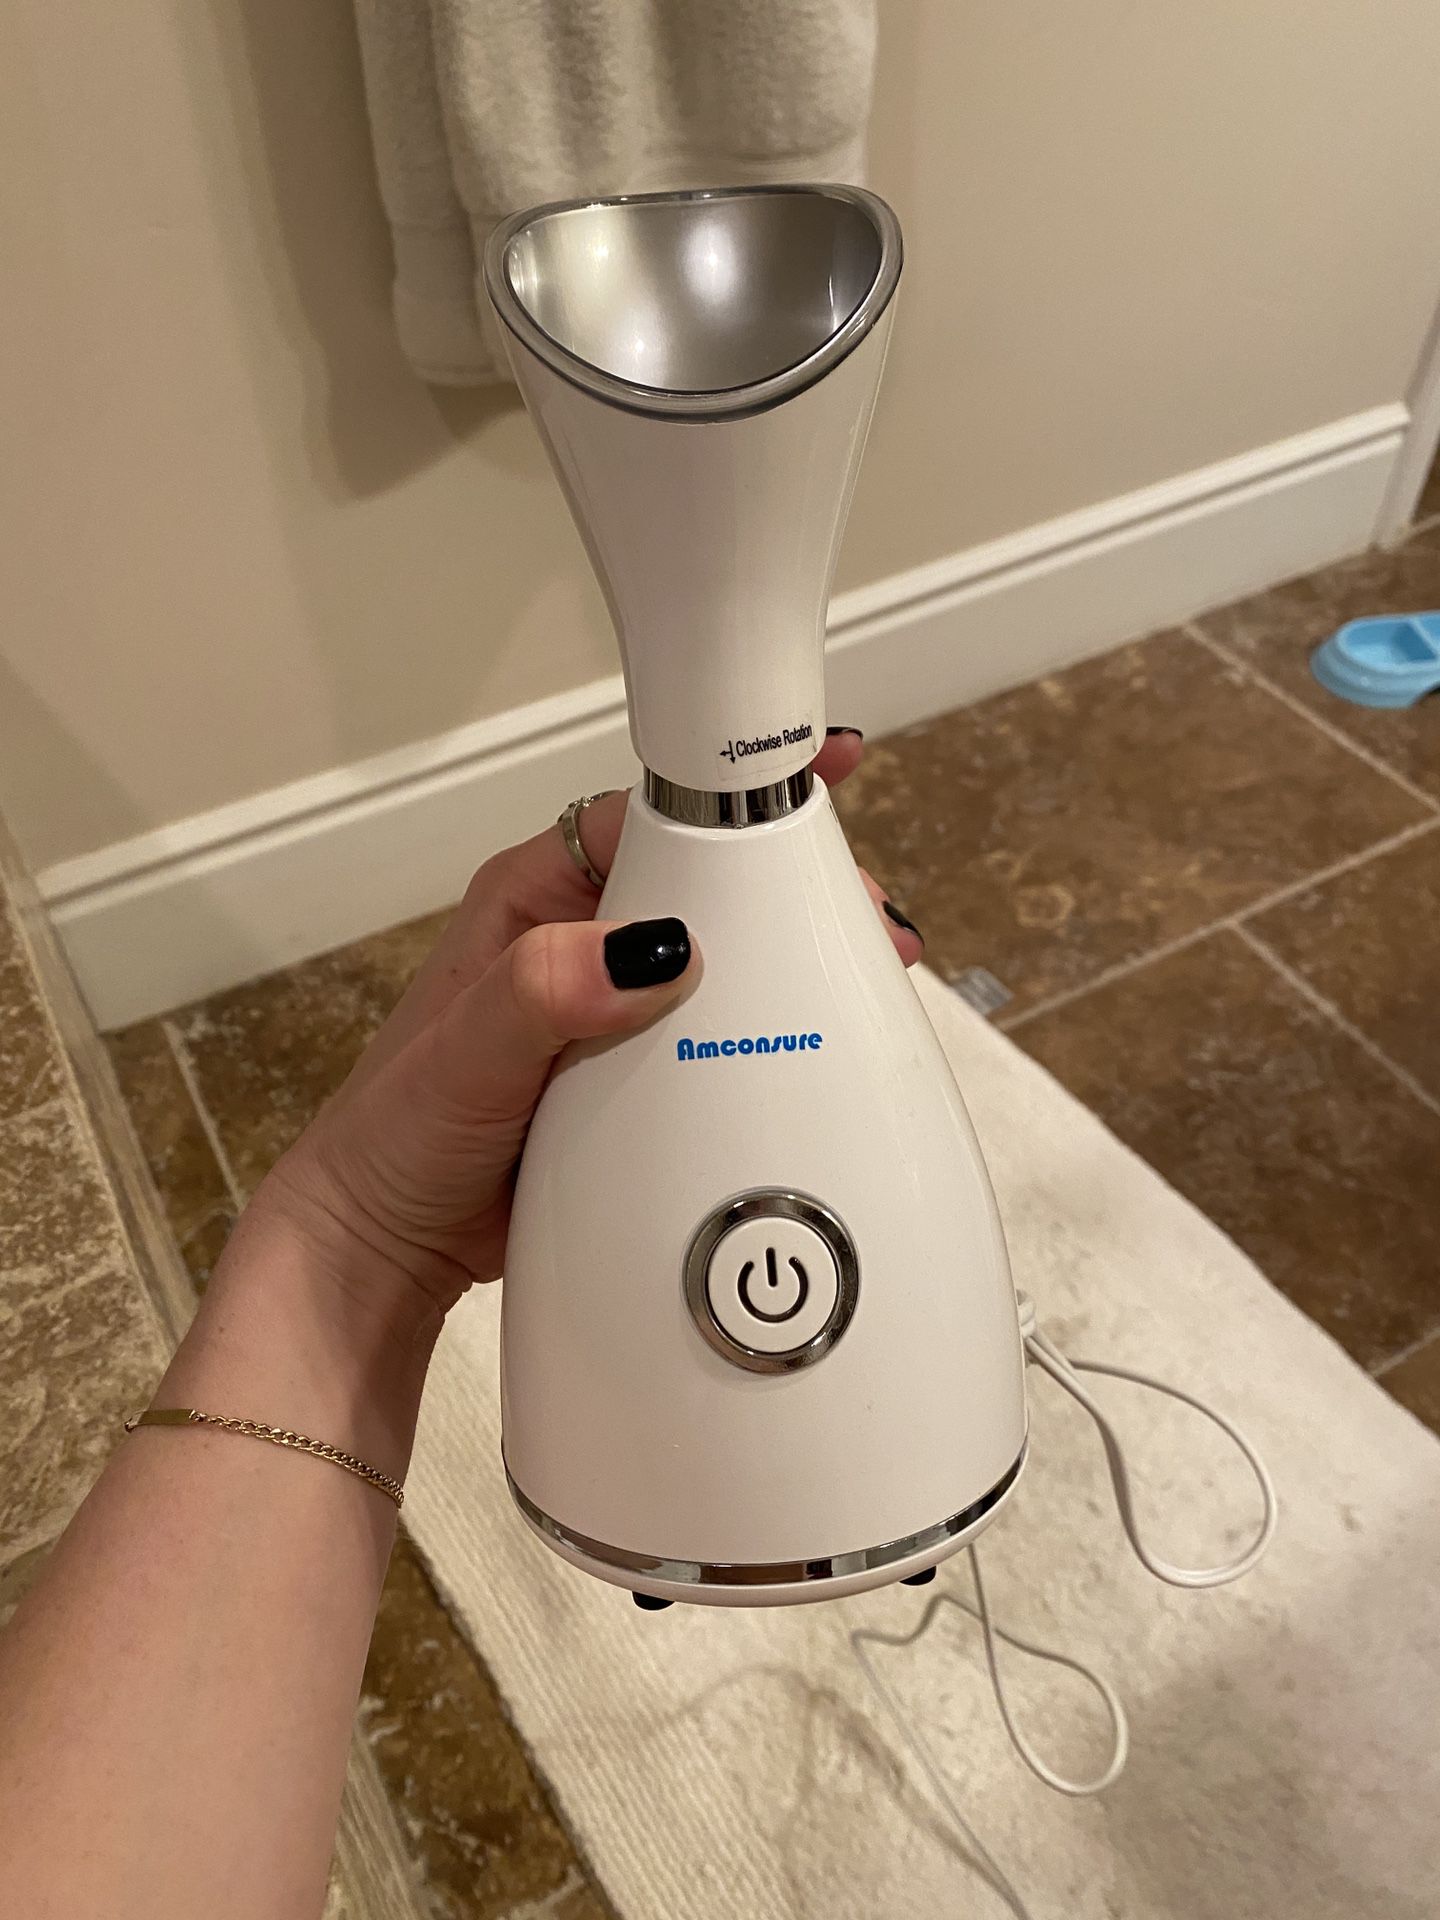 Facial steamer - like new, only used once